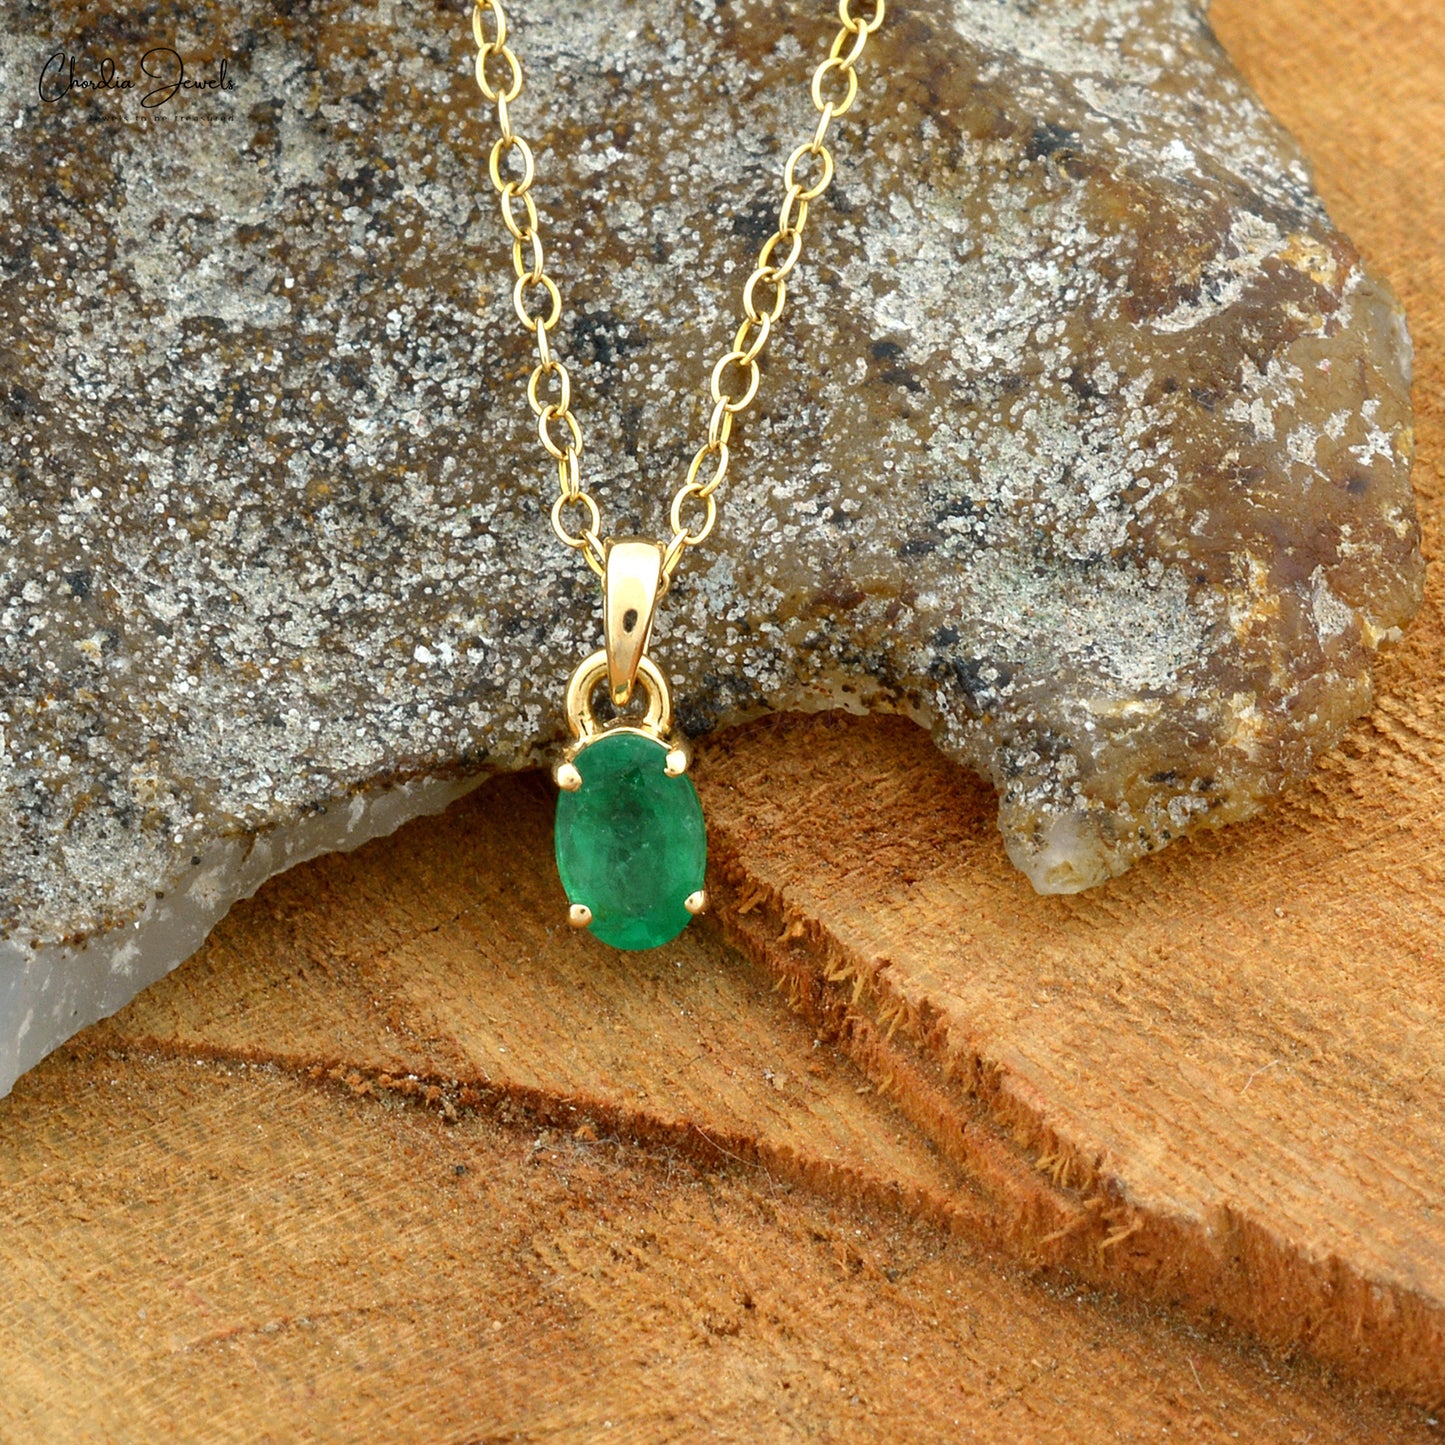 Load image into Gallery viewer, Solitaire Pendant In 14k Yellow Gold Genuine 0.41ct Emerald Single Stone Pendant For Love
